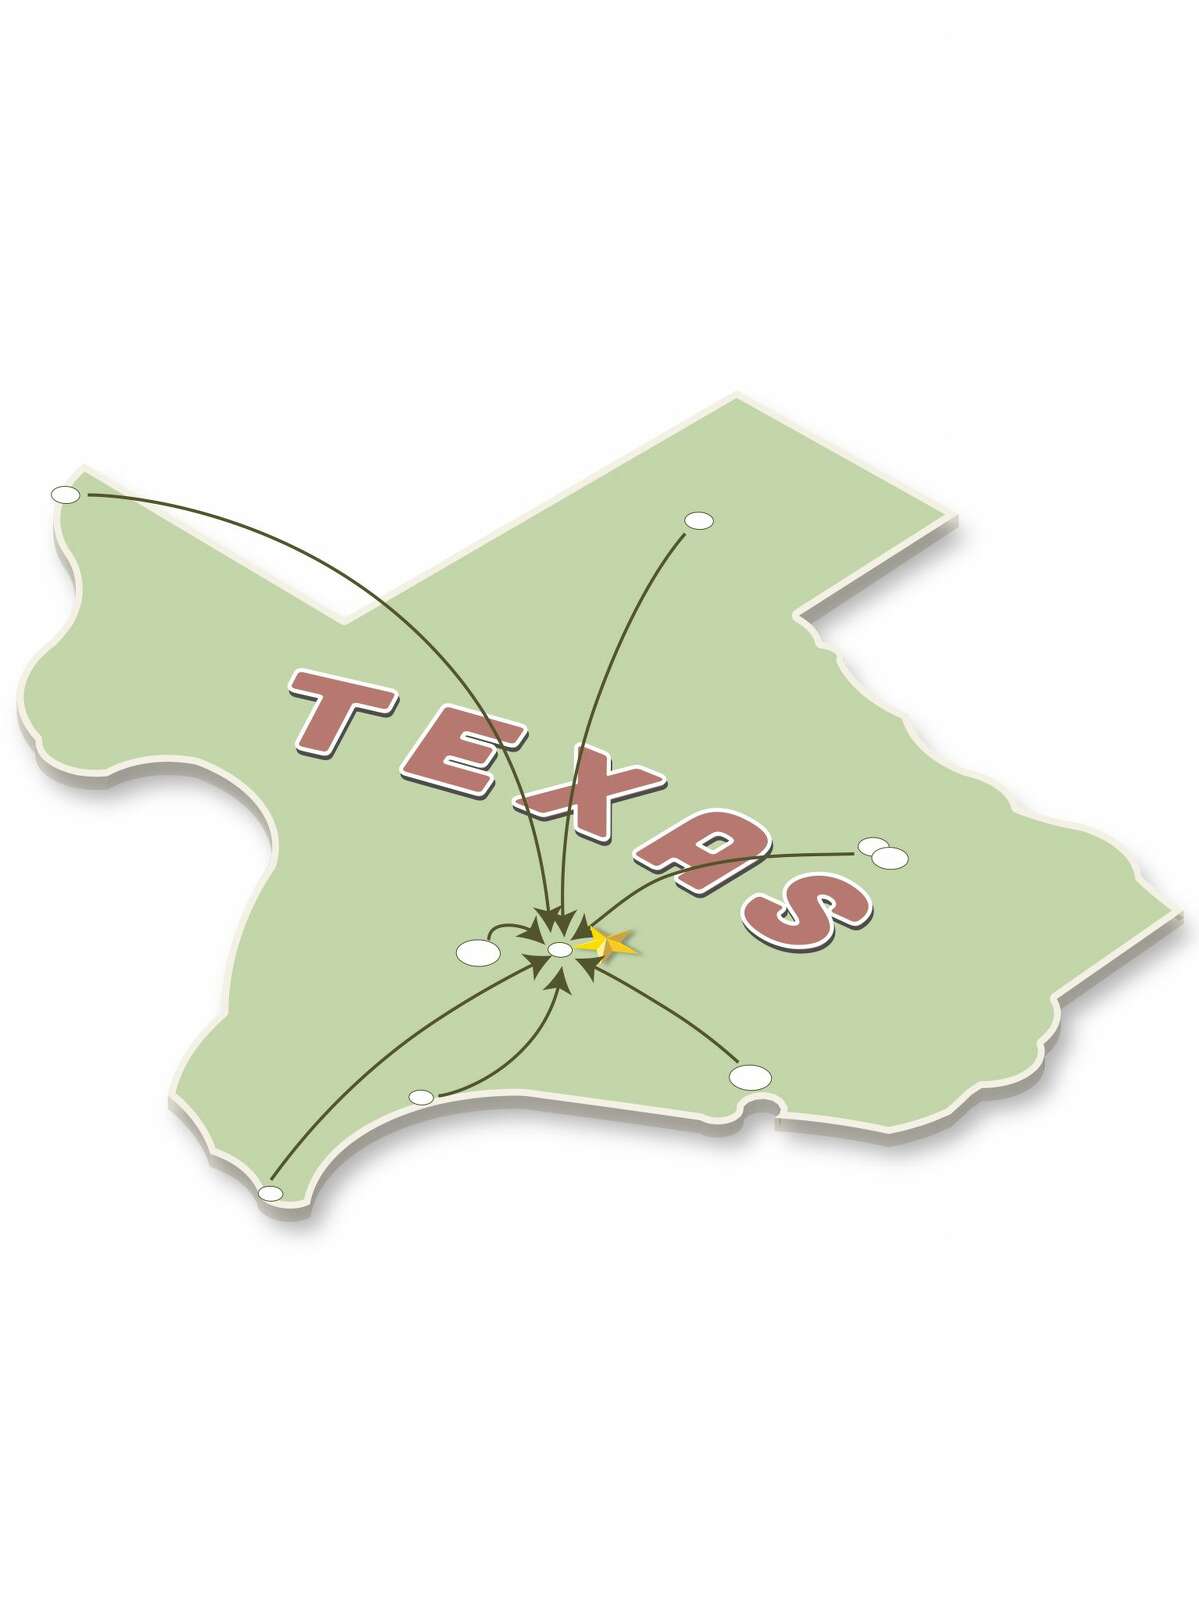 Map of central Texas with arrows flowing from different points.